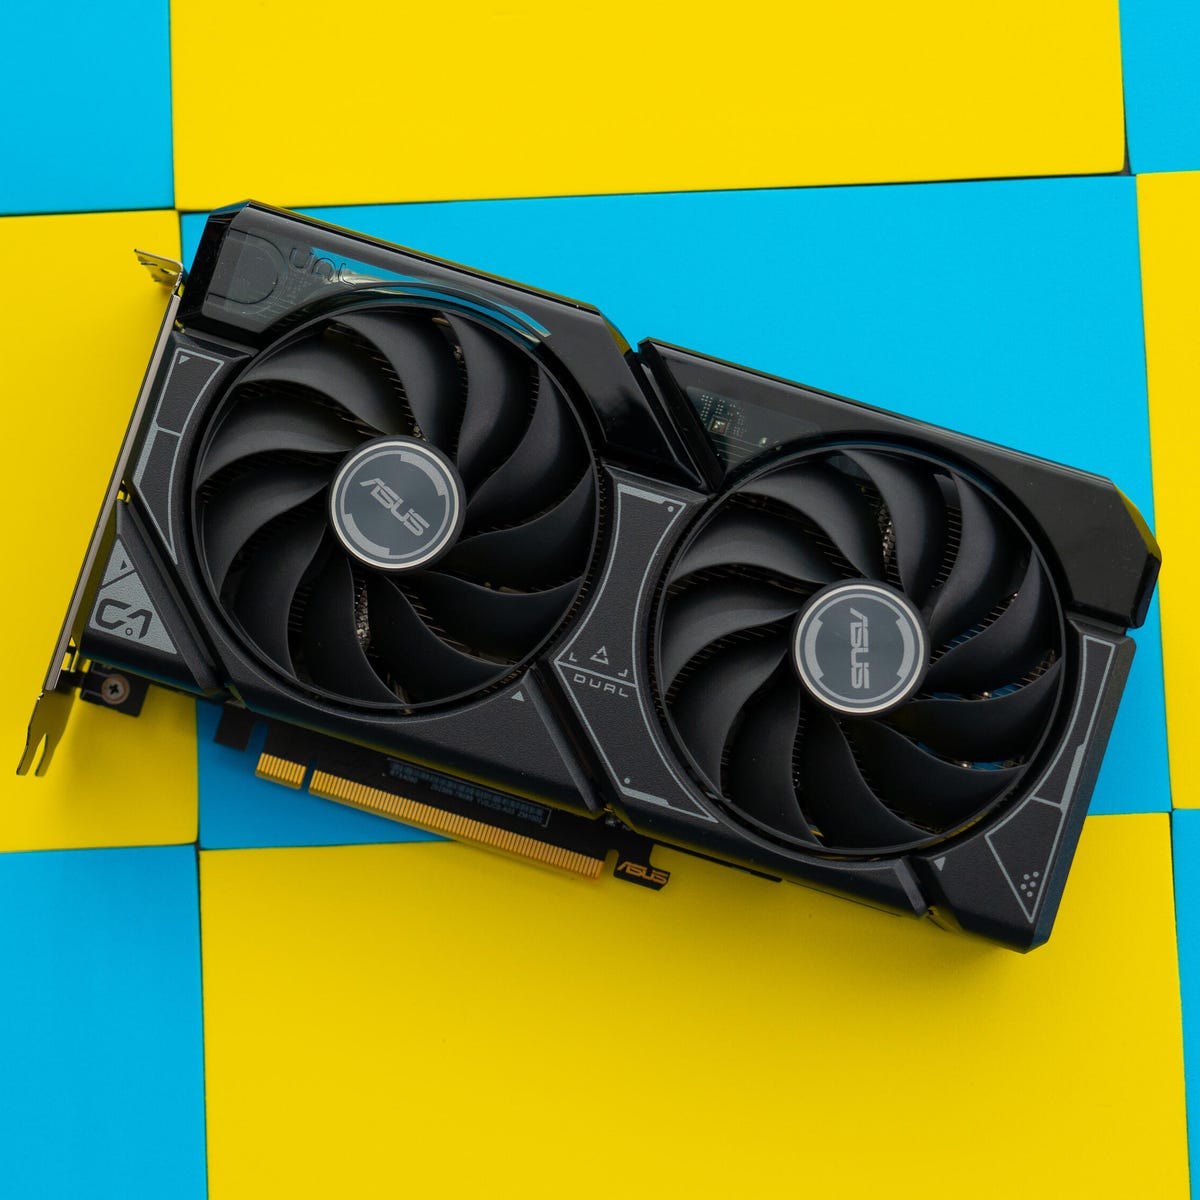 Where to buy the Nvidia RTX 4060 Ti: Specs, price, release date